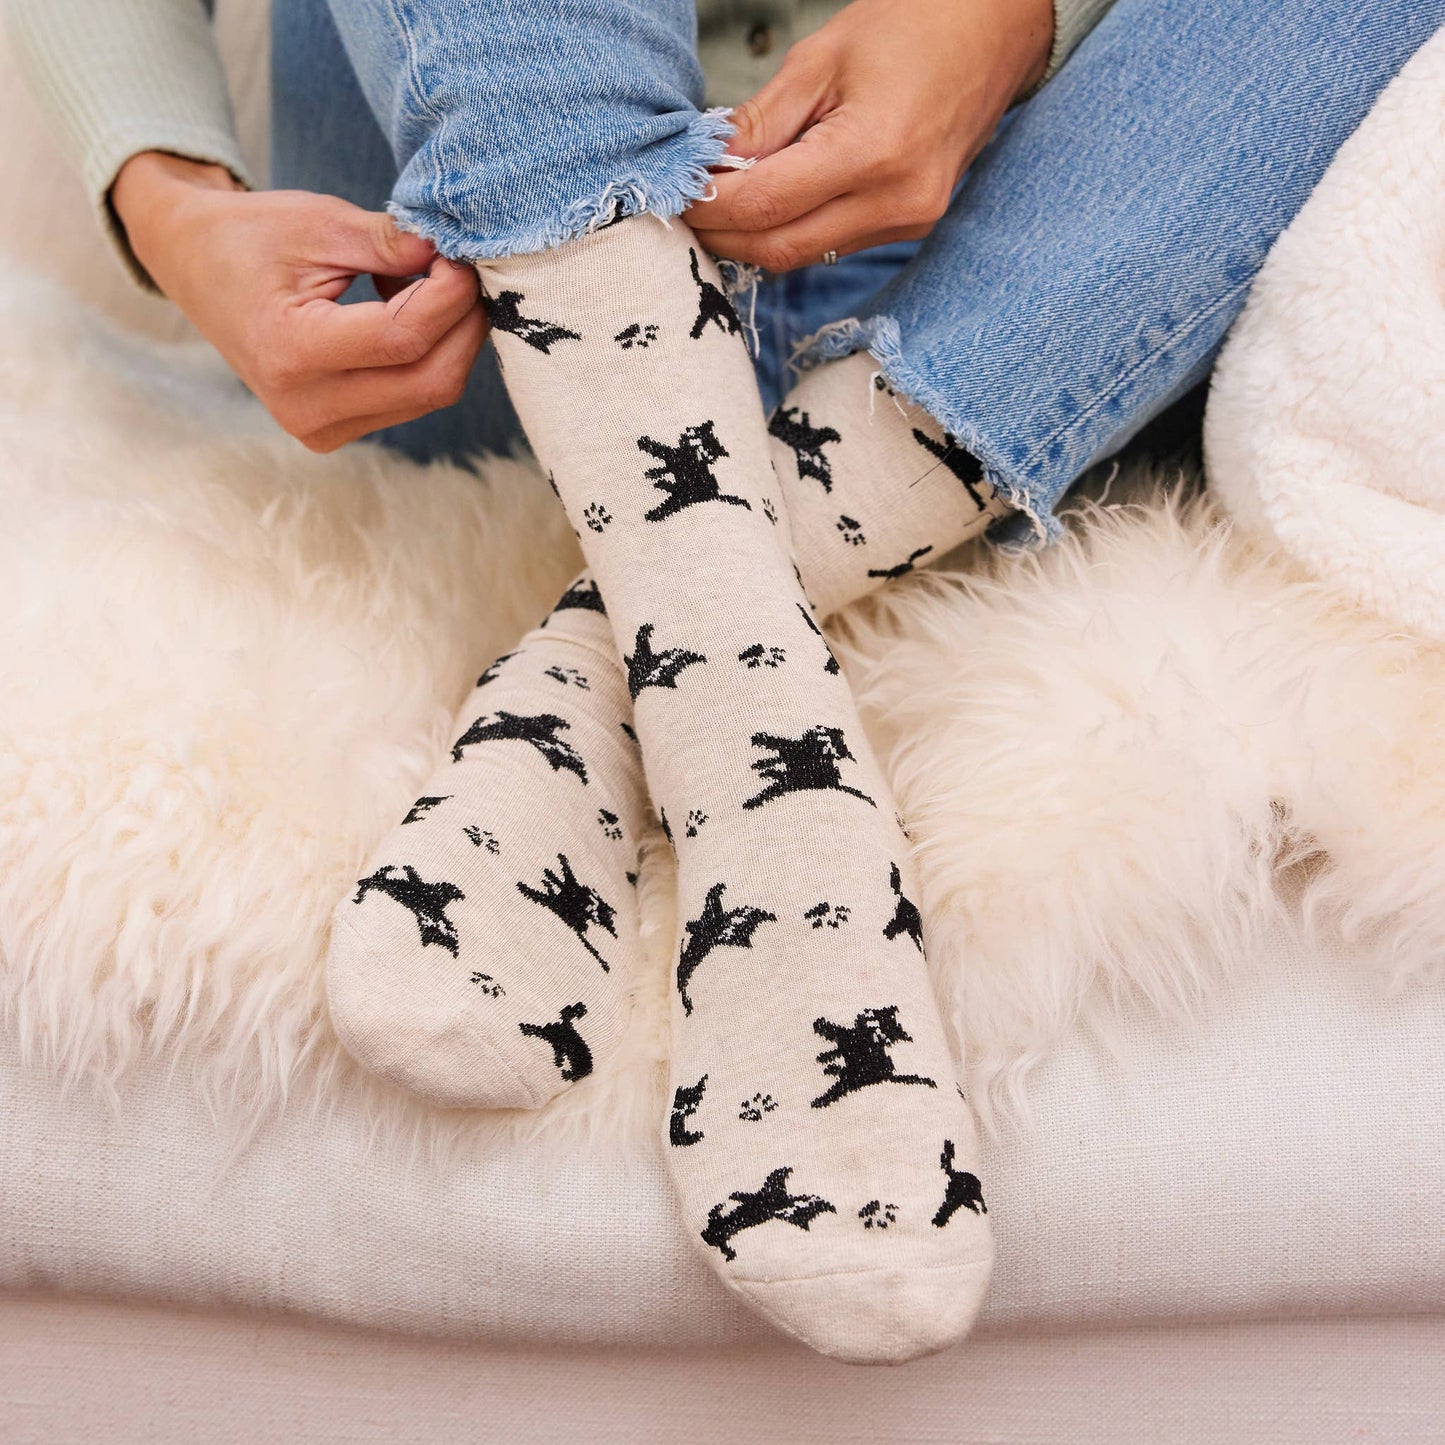 Socks that Save Cats (Beige Cats): Small